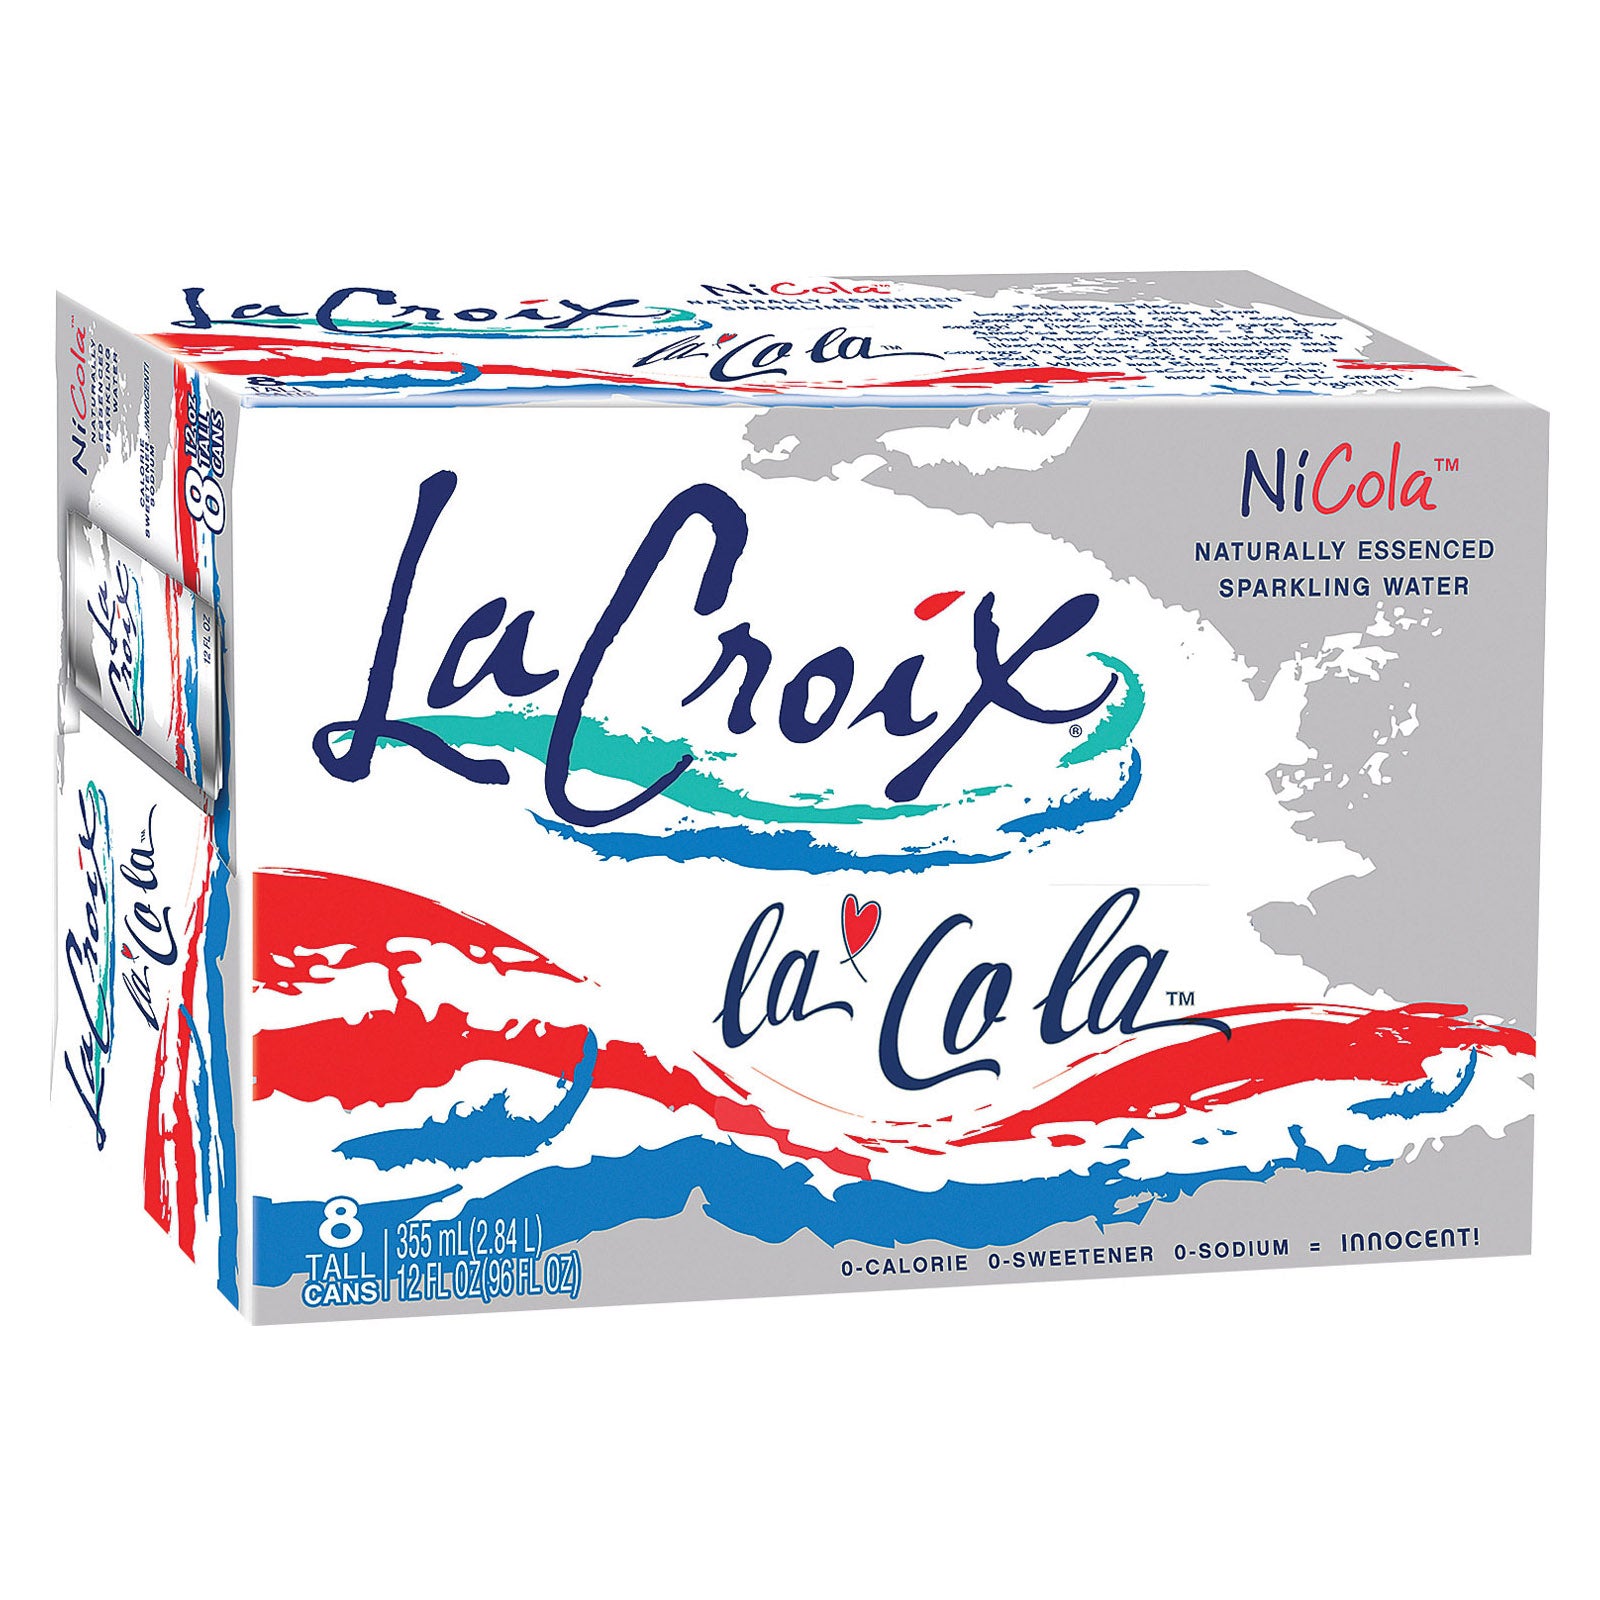 Lacroix Sparkling Water - Nicola - Case Of 3 - 8-12 Fl Oz - Whole Green Foods